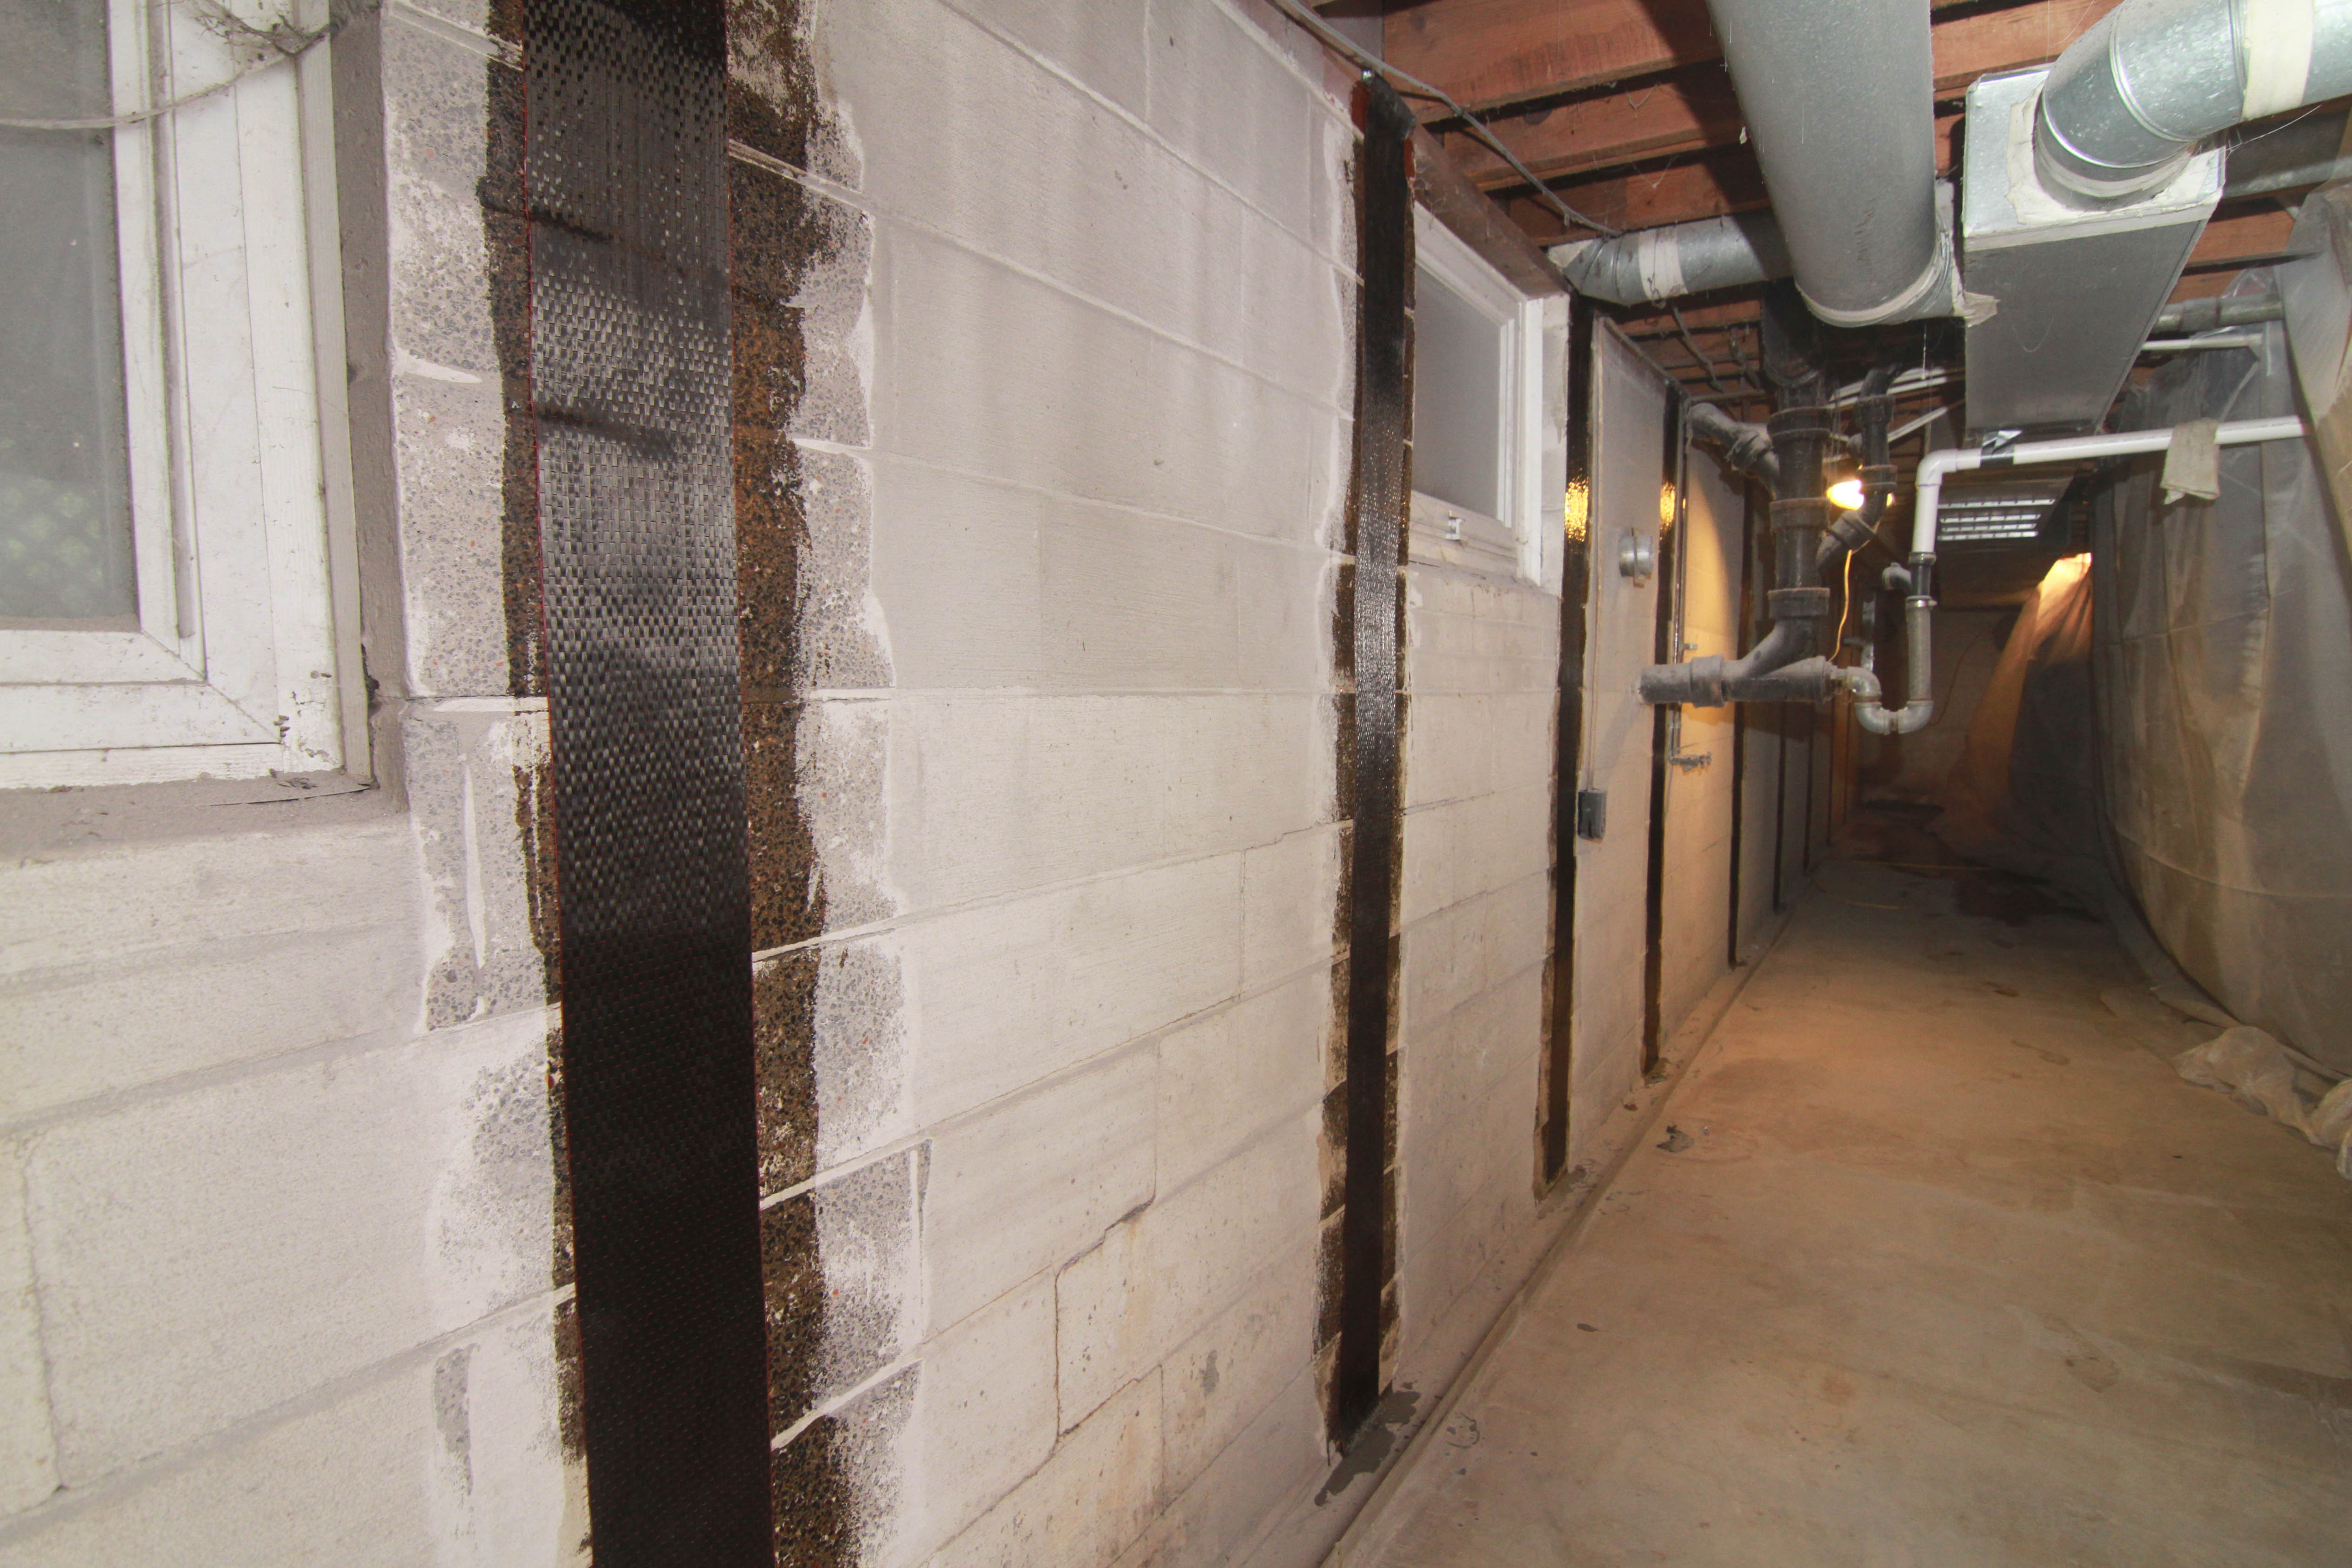 Carbon fiber support installed on concrete basement wall